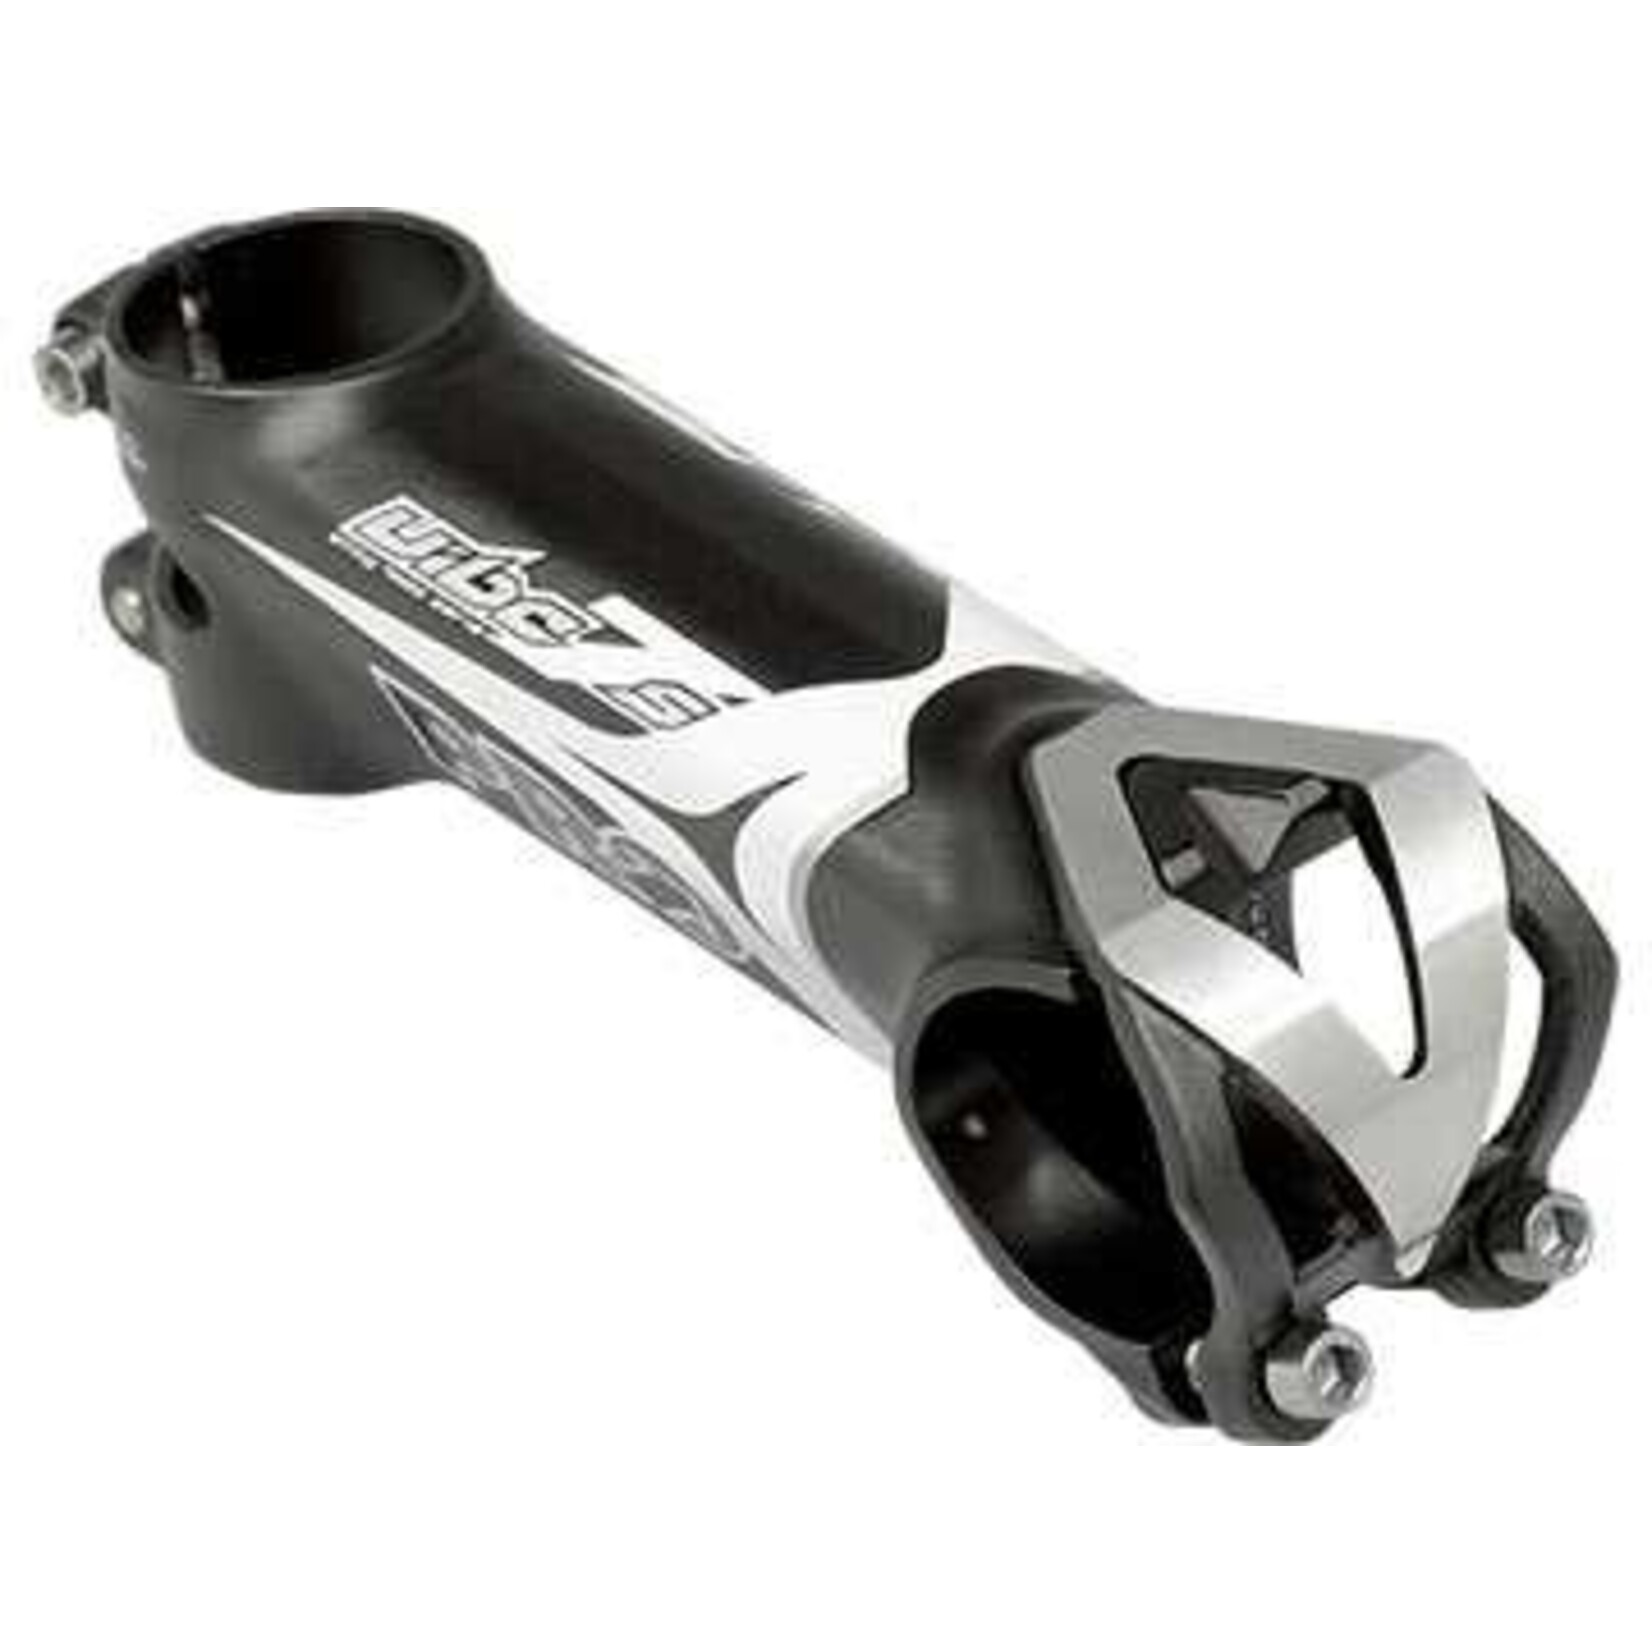 Shimano VIBE 7S STEM BLK 90MMM OS CLAMP, -10 DEGR, 44MM STACK